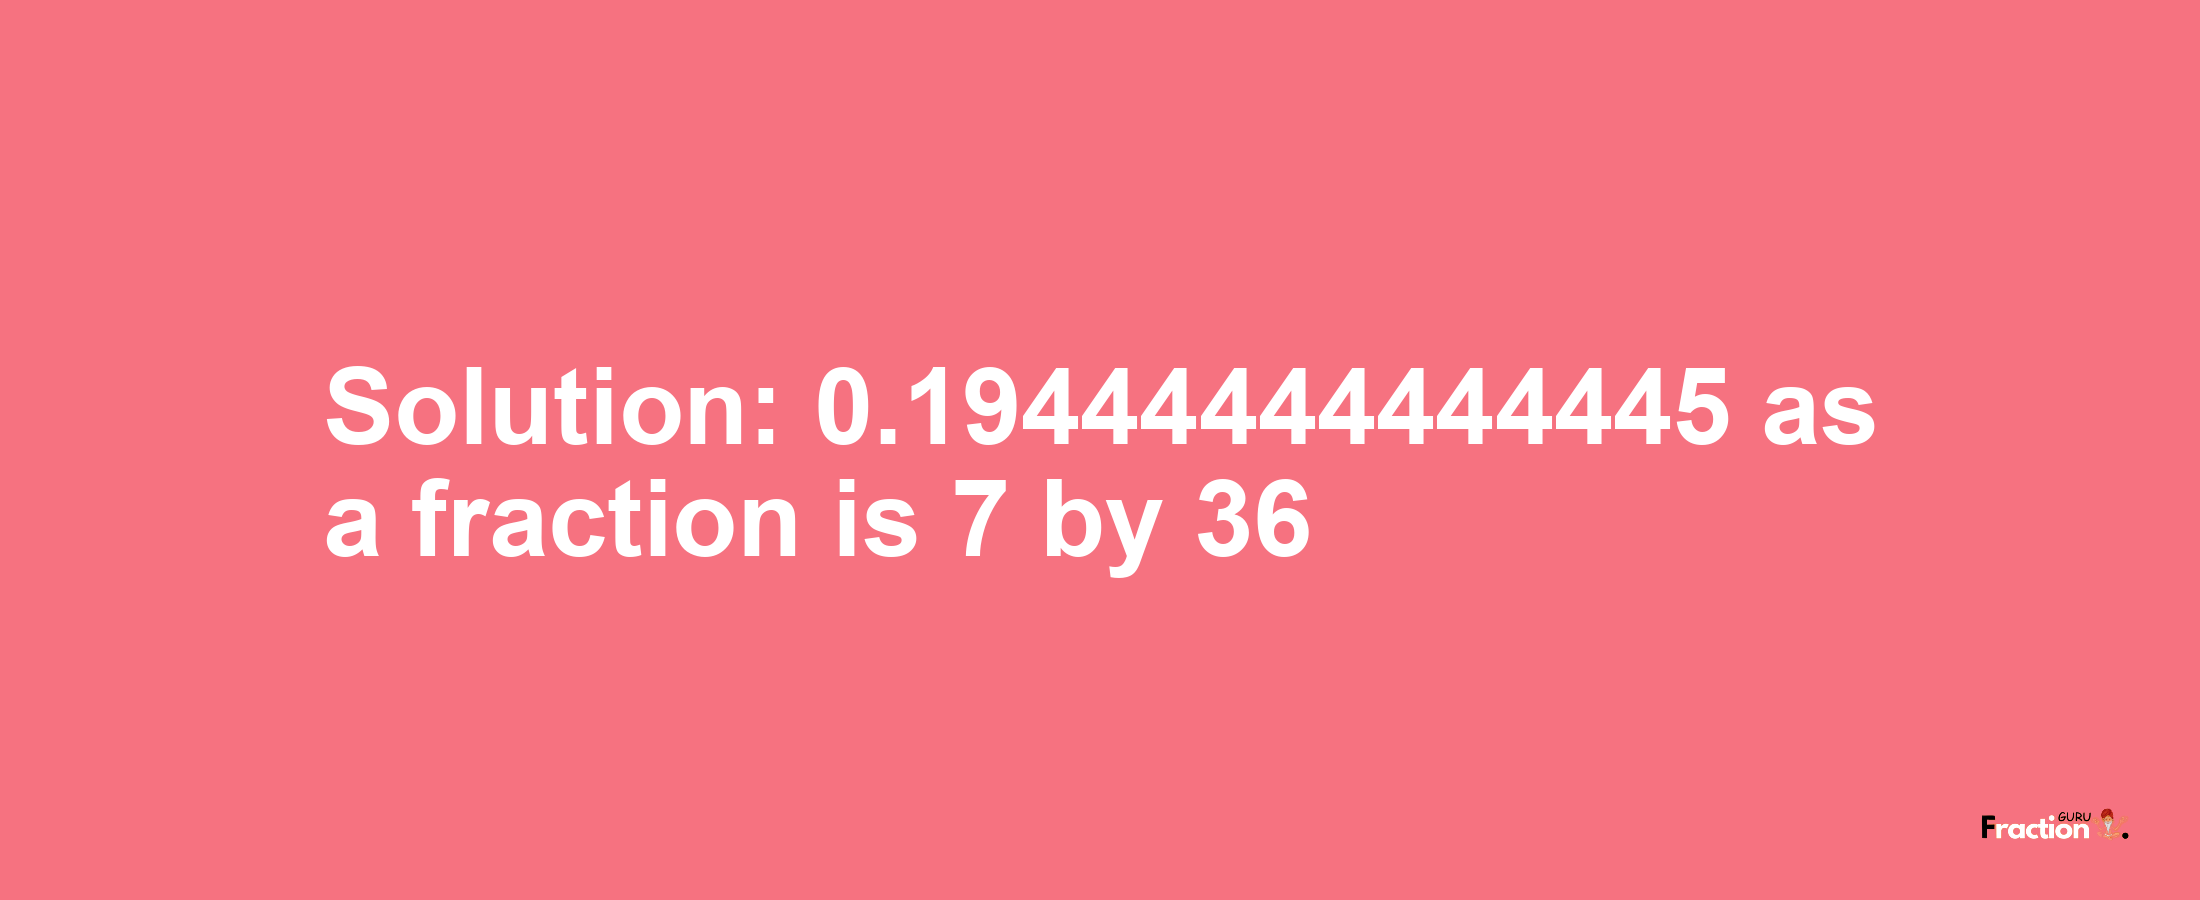 Solution:0.19444444444445 as a fraction is 7/36